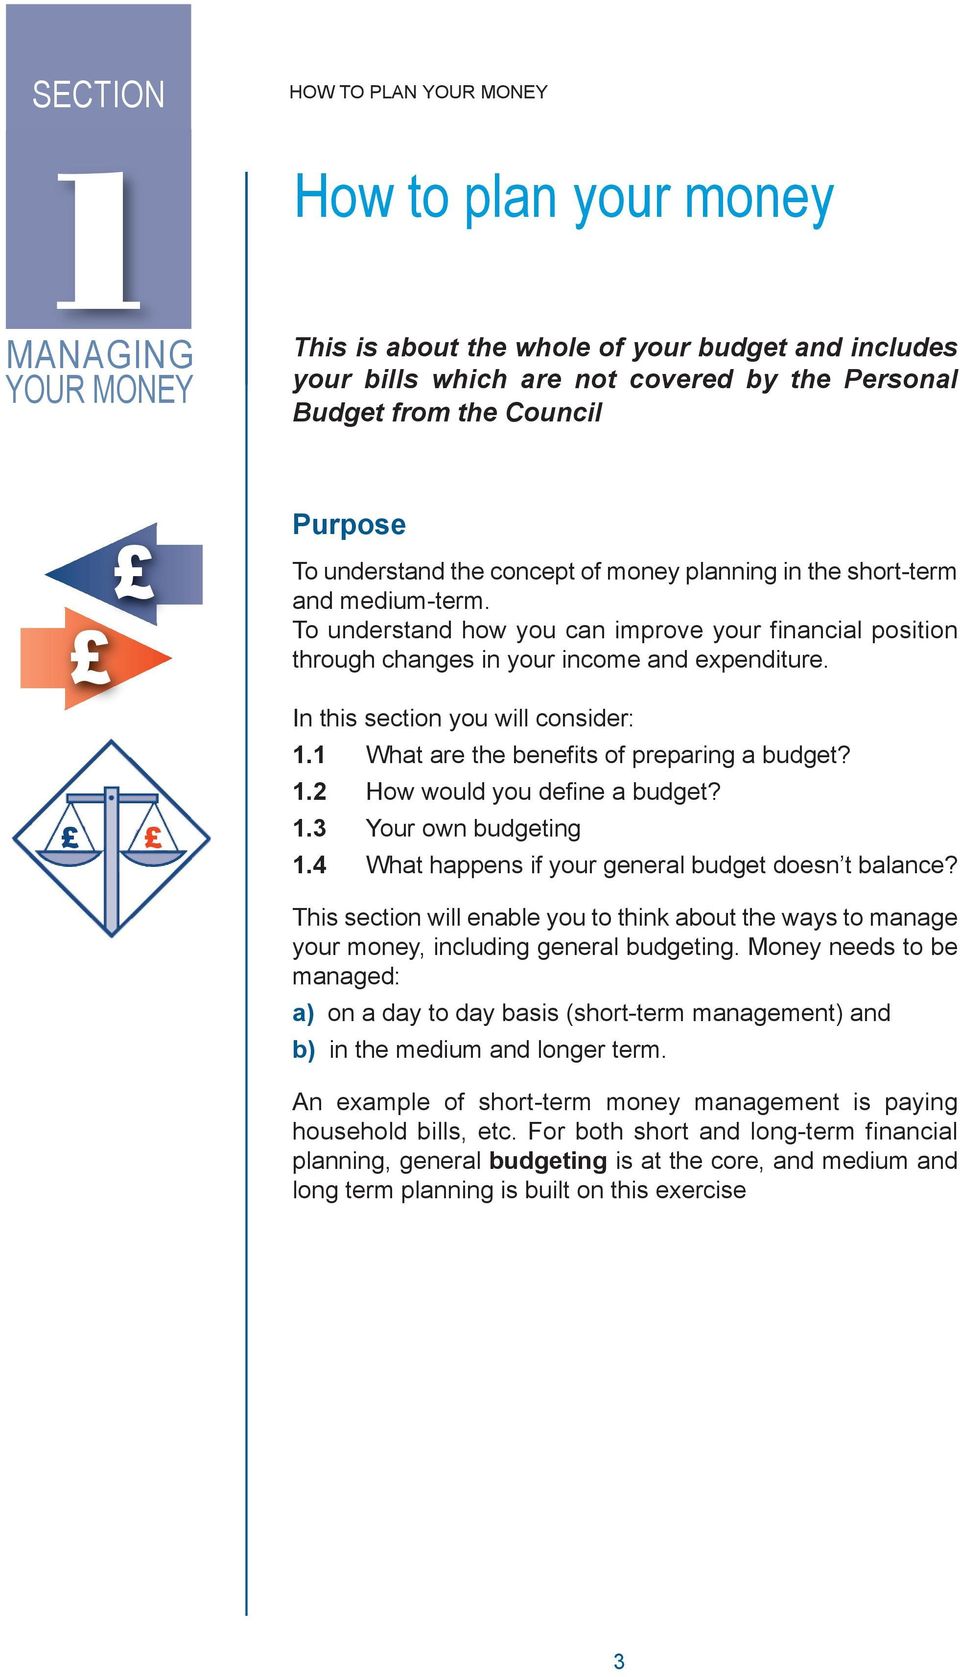 In this section you will consider: 1.1 What are the benefits of preparing a budget? 1.2 How would you define a budget? 1.3 Your own budgeting 1.4 What happens if your general budget doesn t balance?